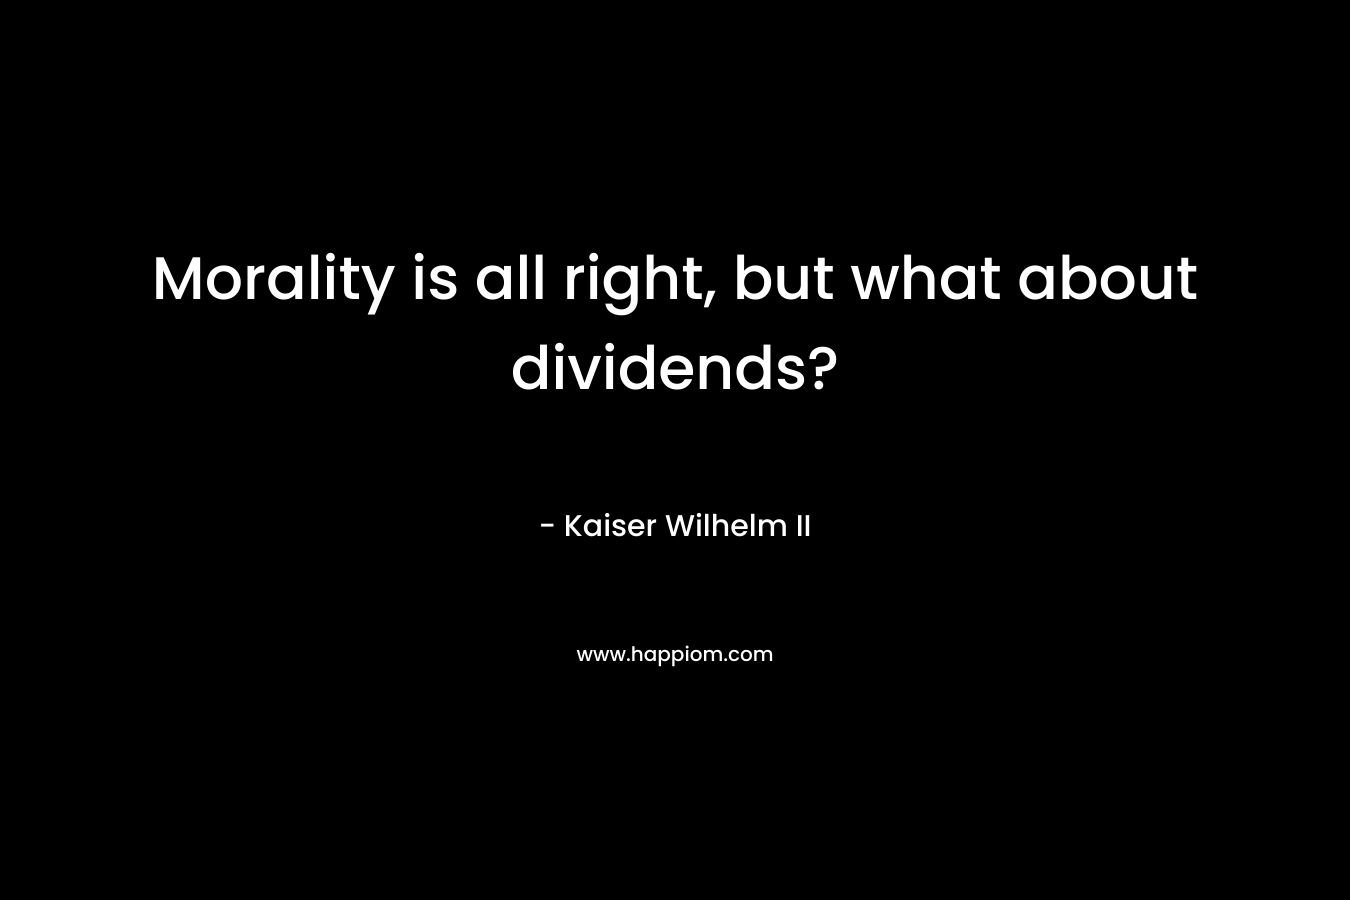 Morality is all right, but what about dividends?